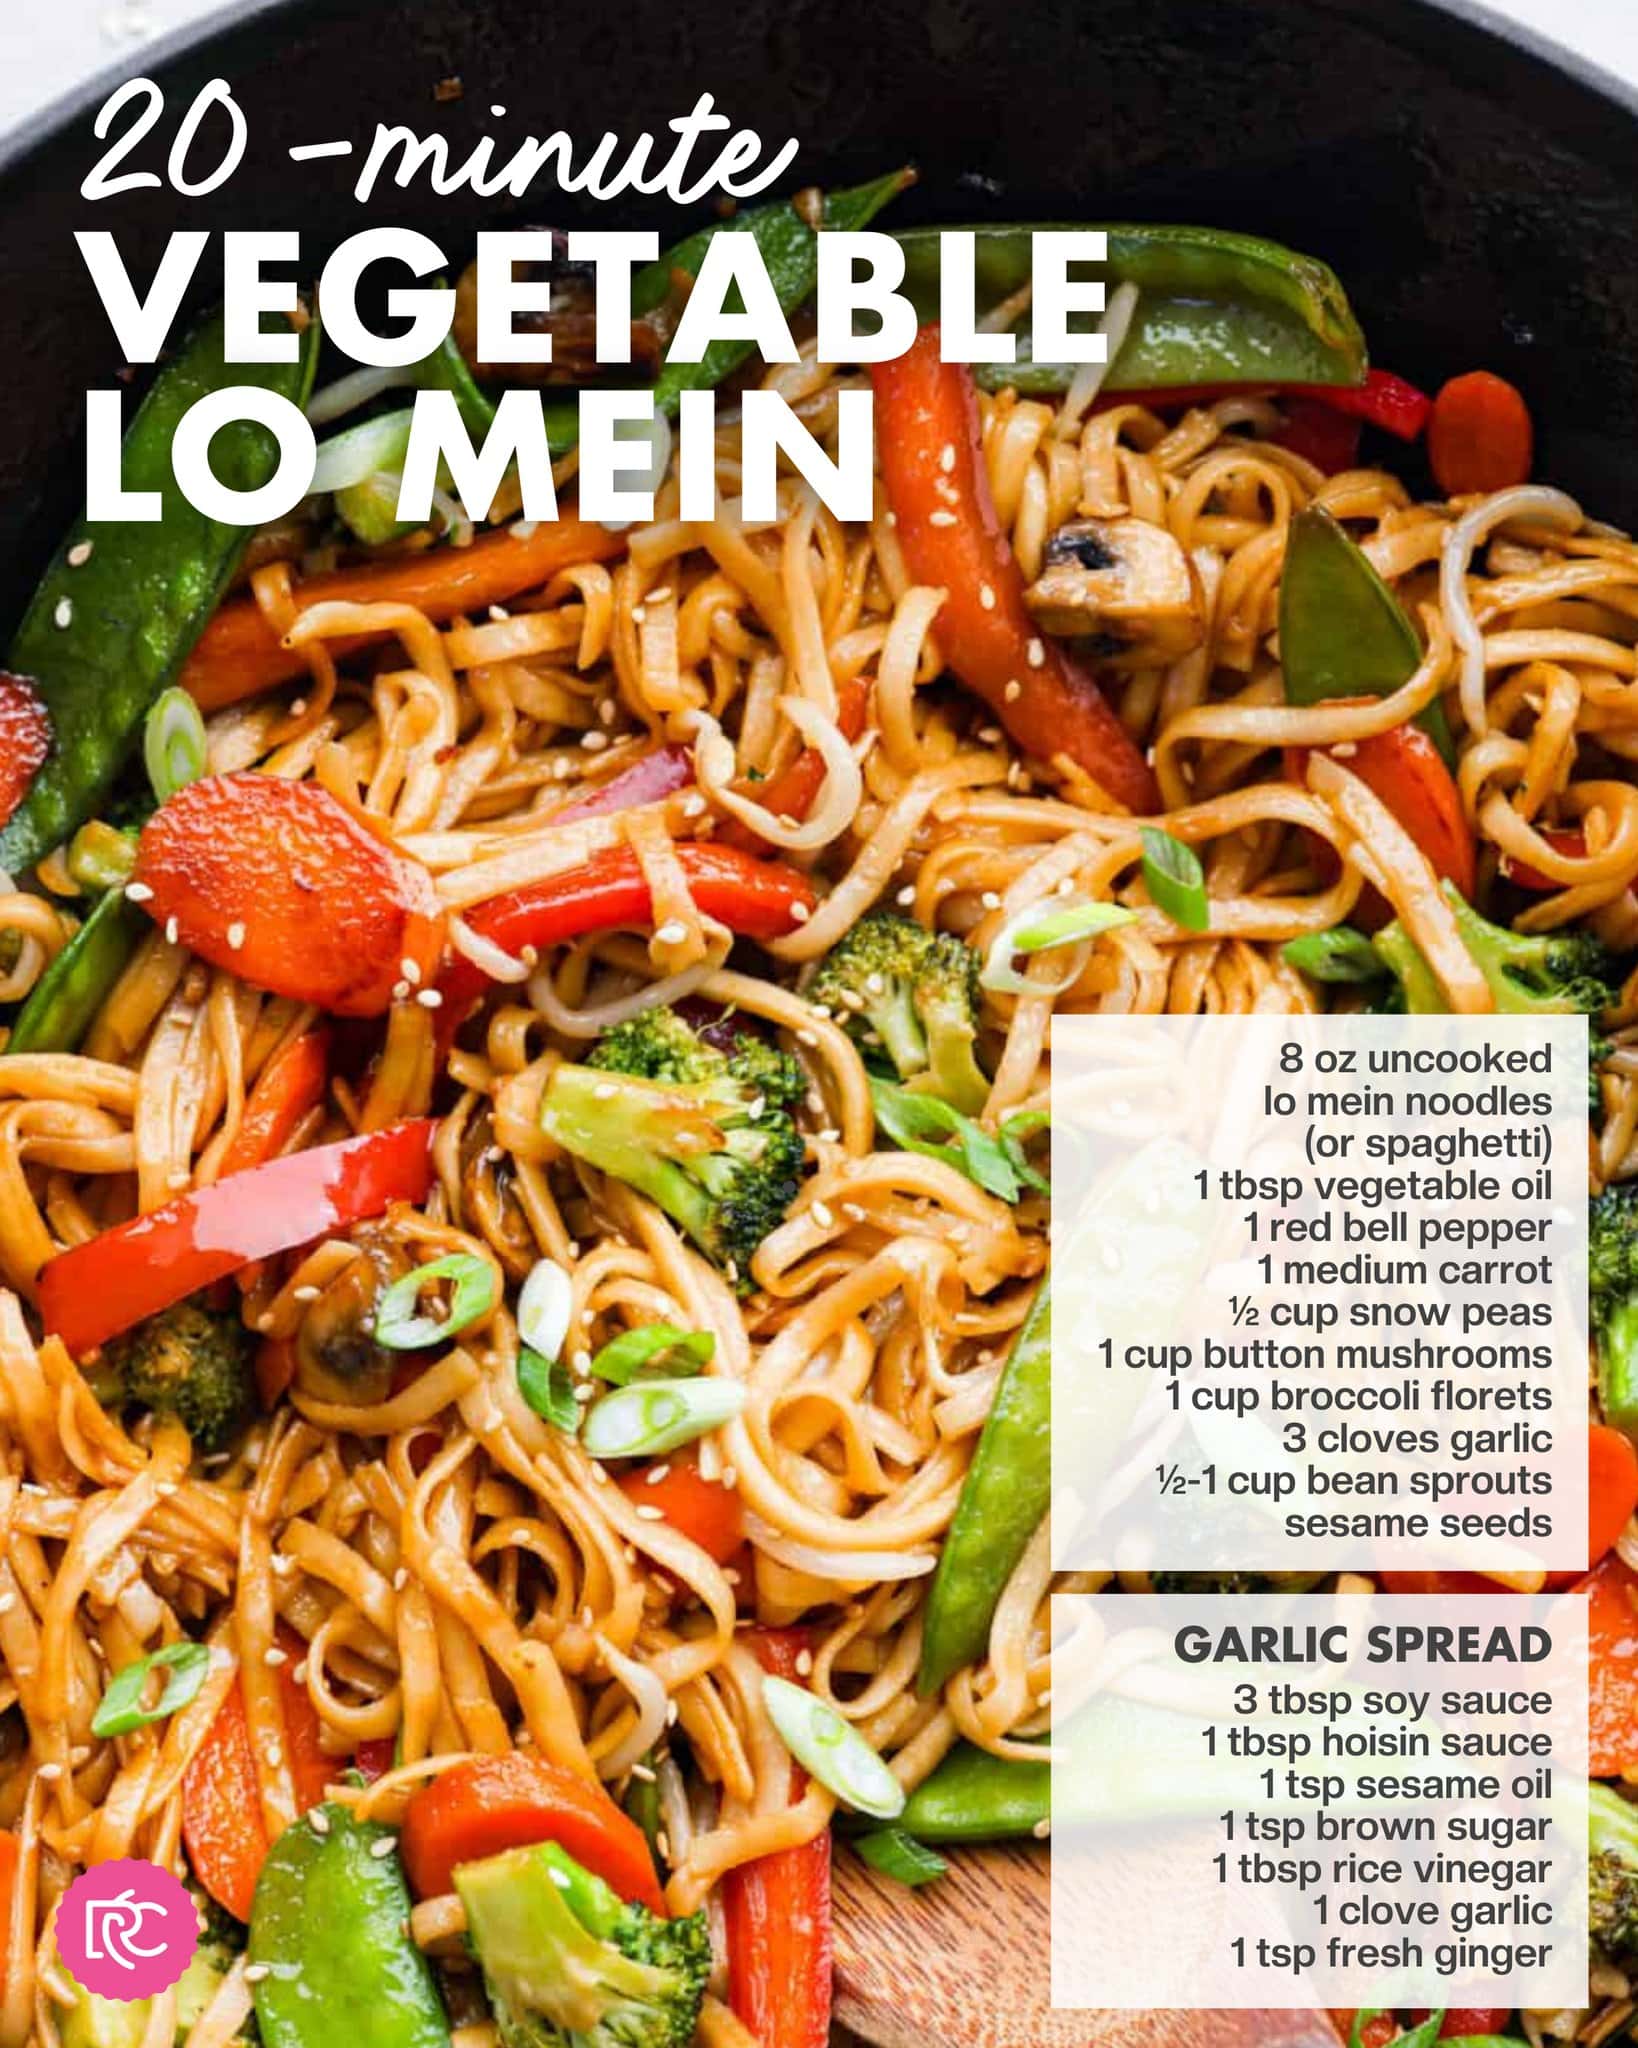 A colorful image of vegetable lo mein featuring noodles, bell peppers, snow peas, mushrooms, and carrots, garnished with vibrant greens. This meal is perfect for busy families and comes alongside a list of